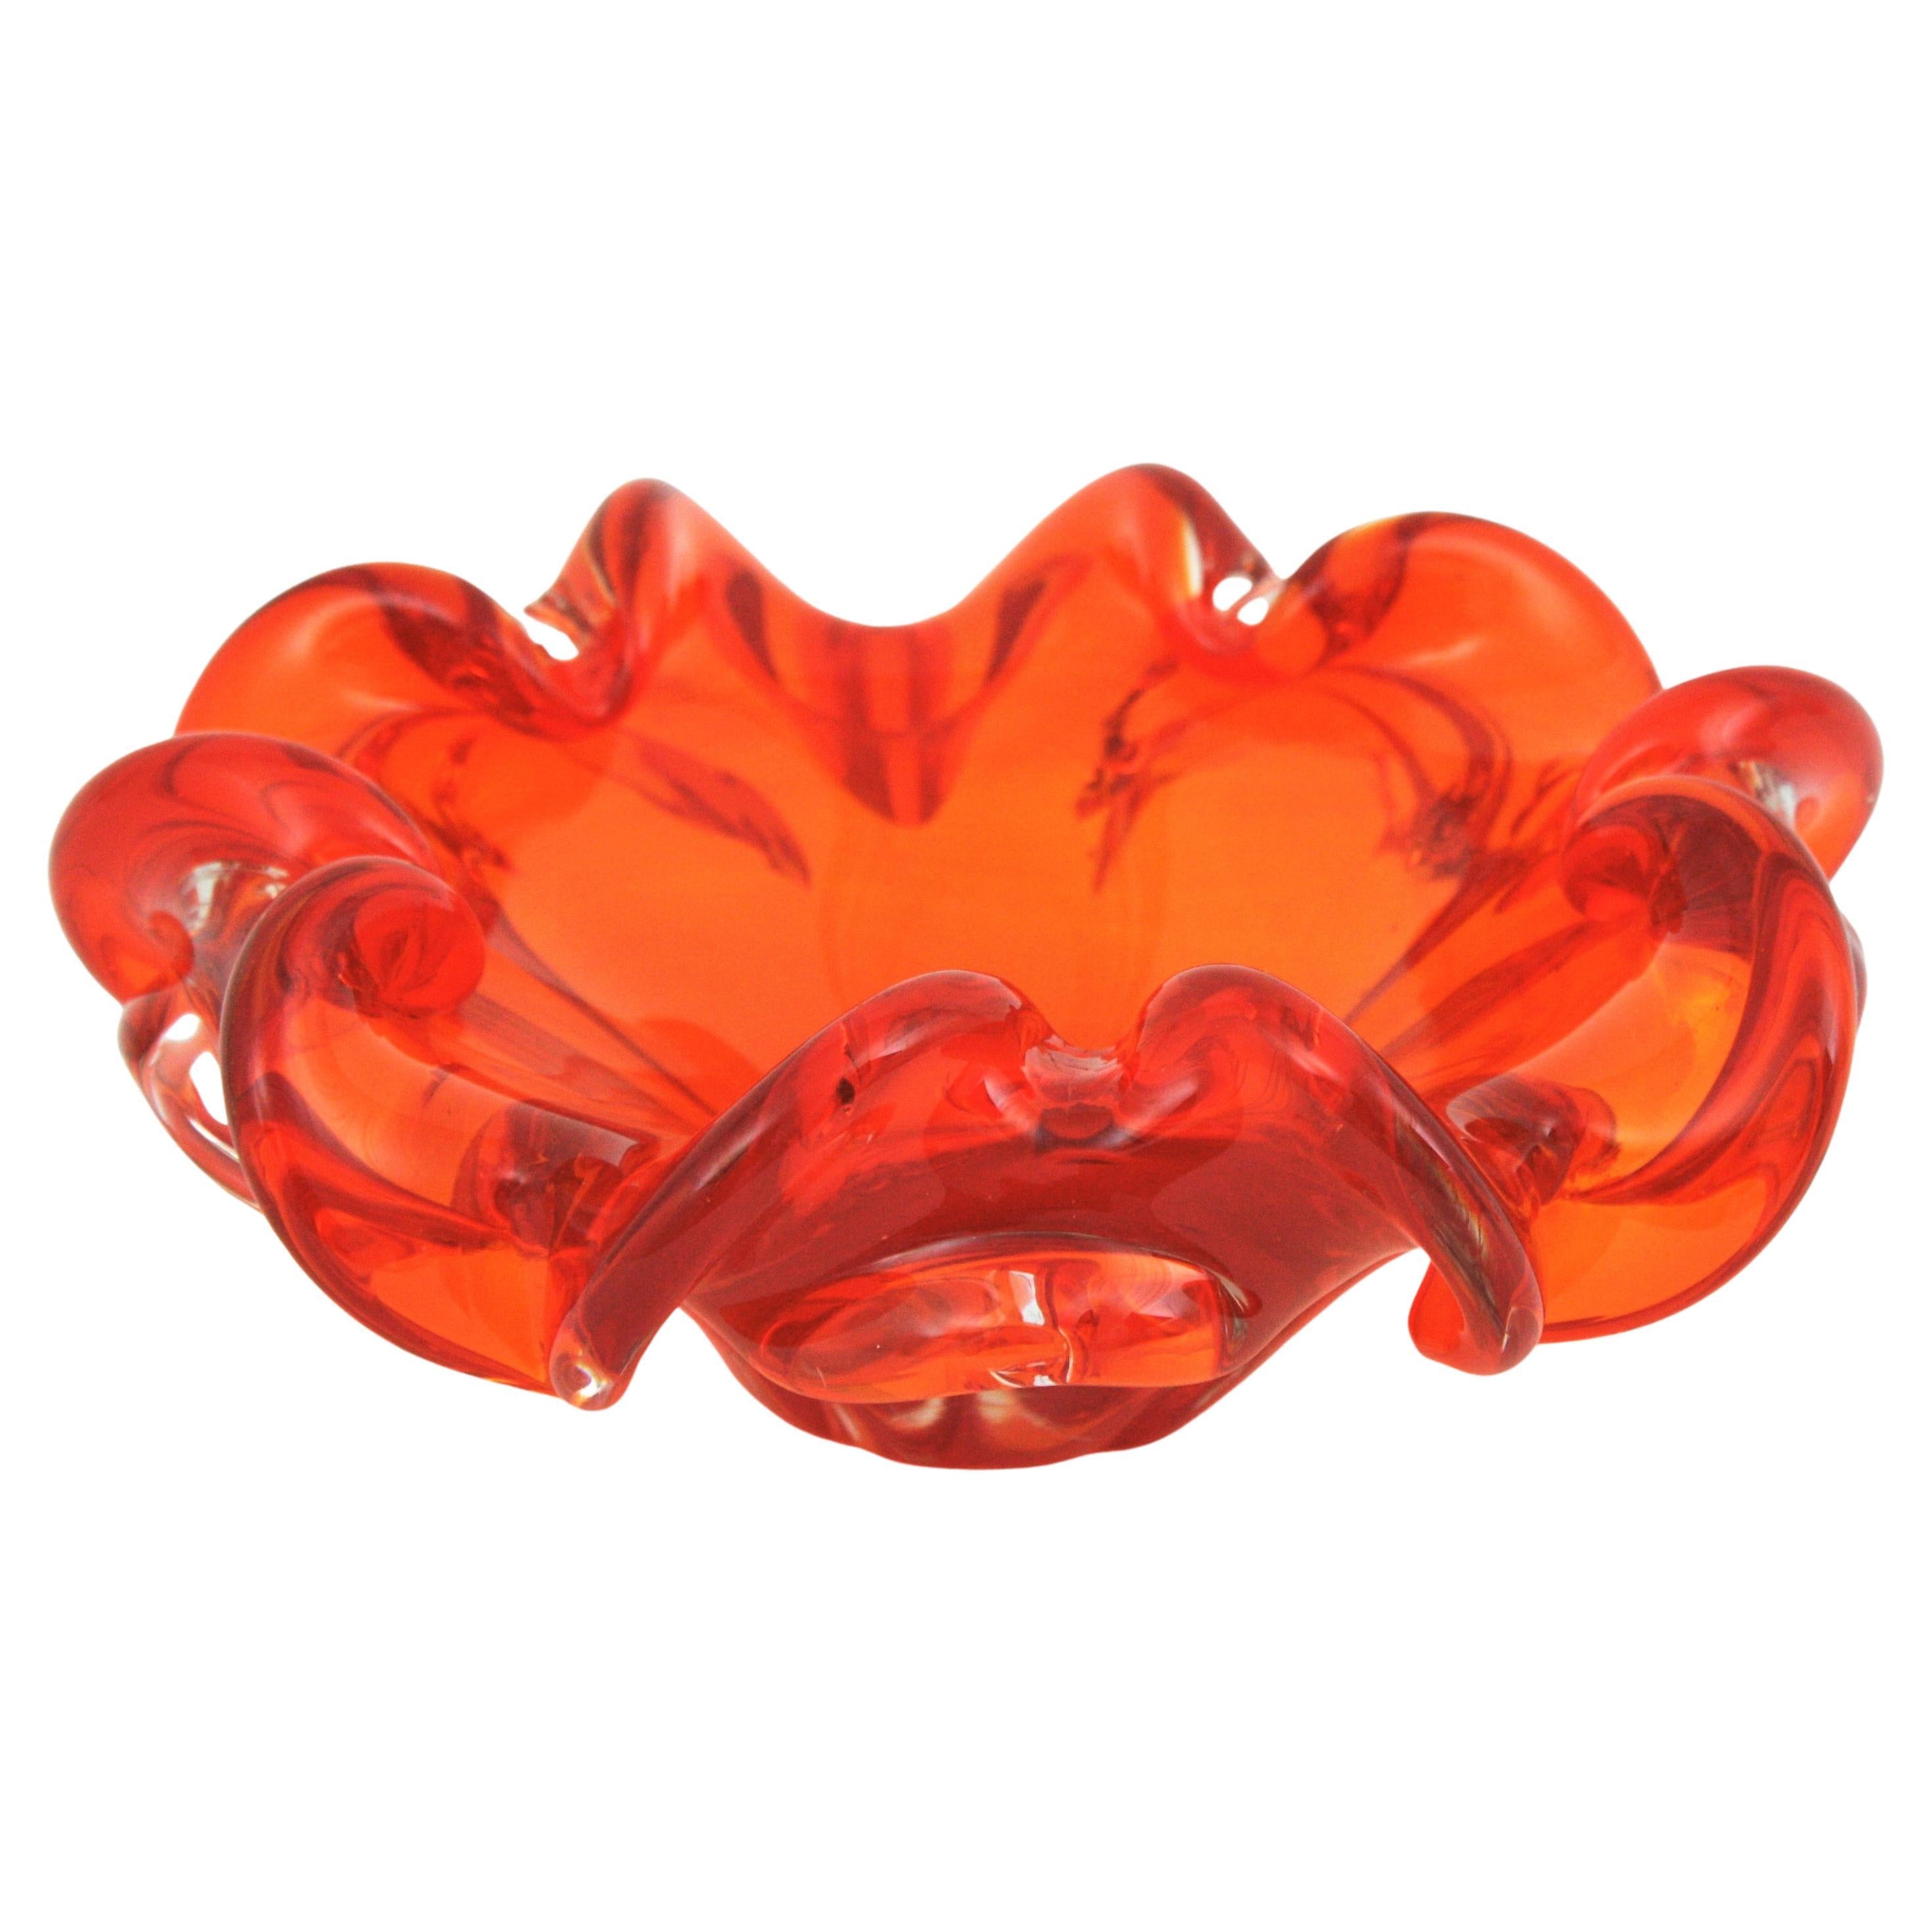 Murano Art Glass Flower Shaped Bowl, ashtray or vide-poche, Italy 1950s-1960s.
Attributed to Seguso Vetri d'Arte.
Orange and clear glass.
Gorgeous handblown Murano flower shaped bowl in vibrant orange and clear glass. Orange glass submerged into